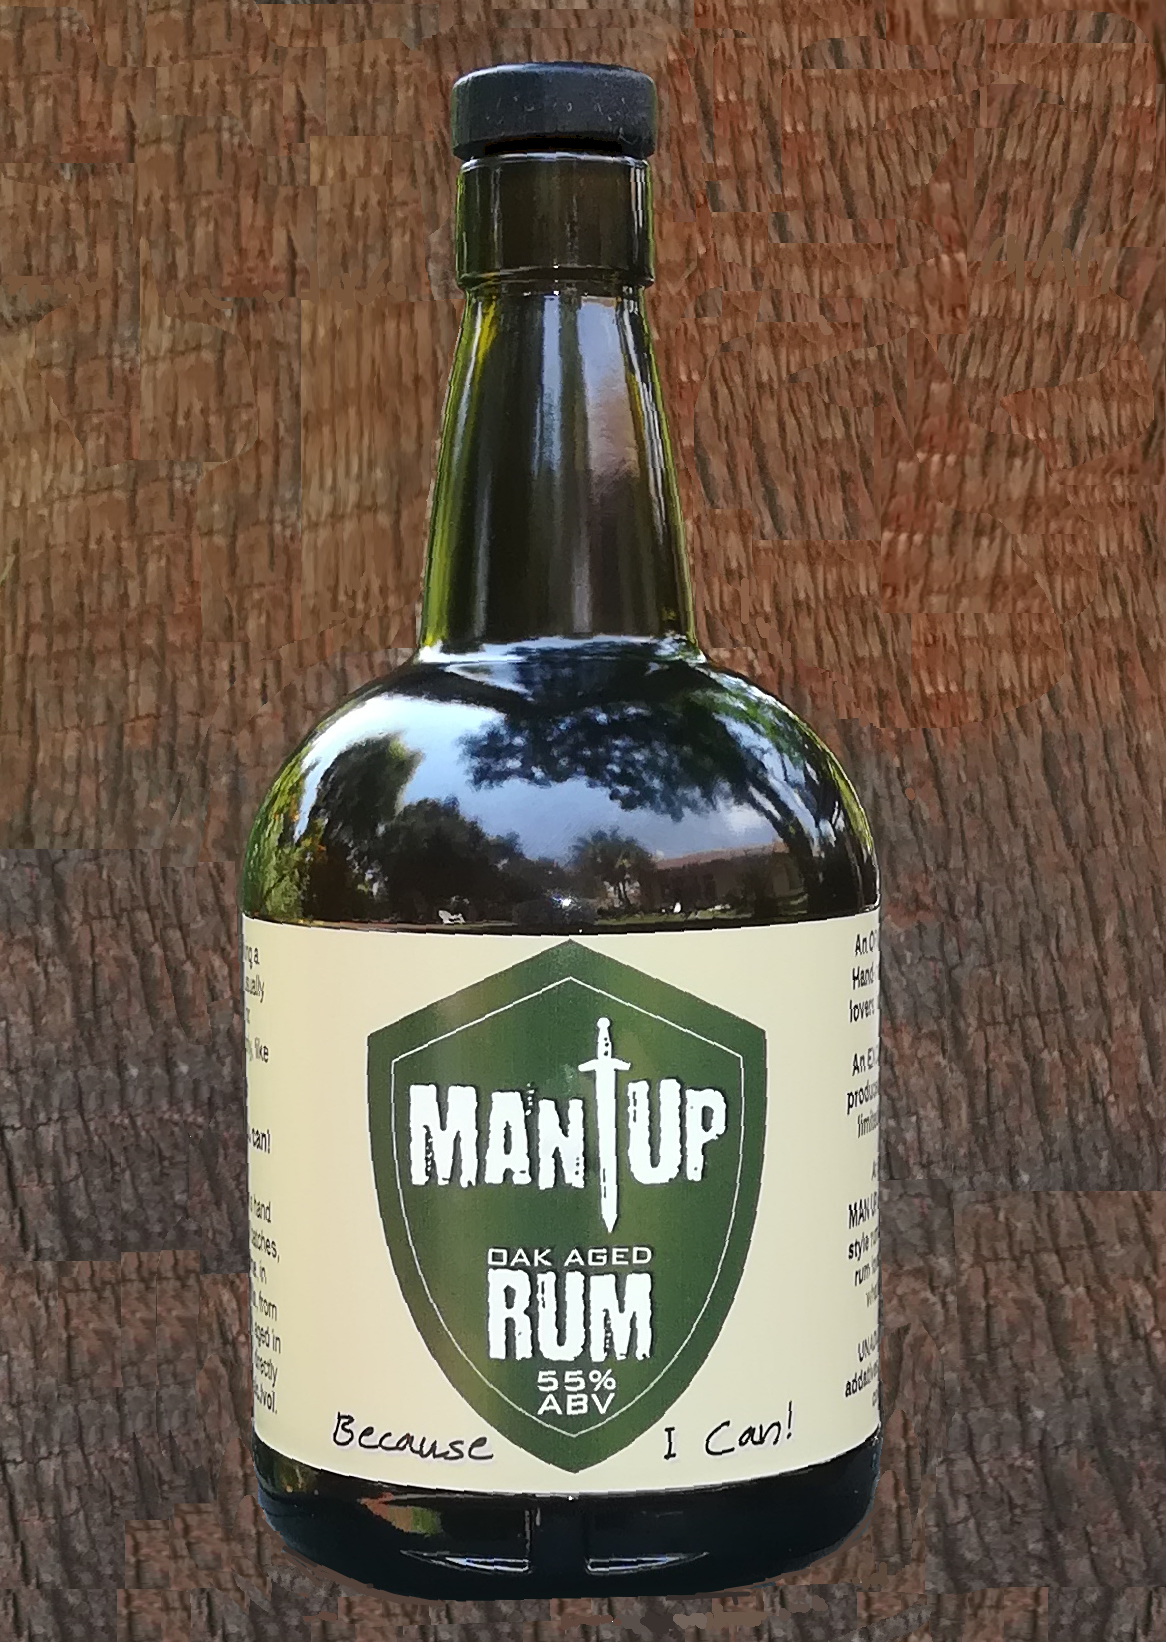 South Africa's Man Up Rum 55% - Unblended Oak Aged Navy style rum